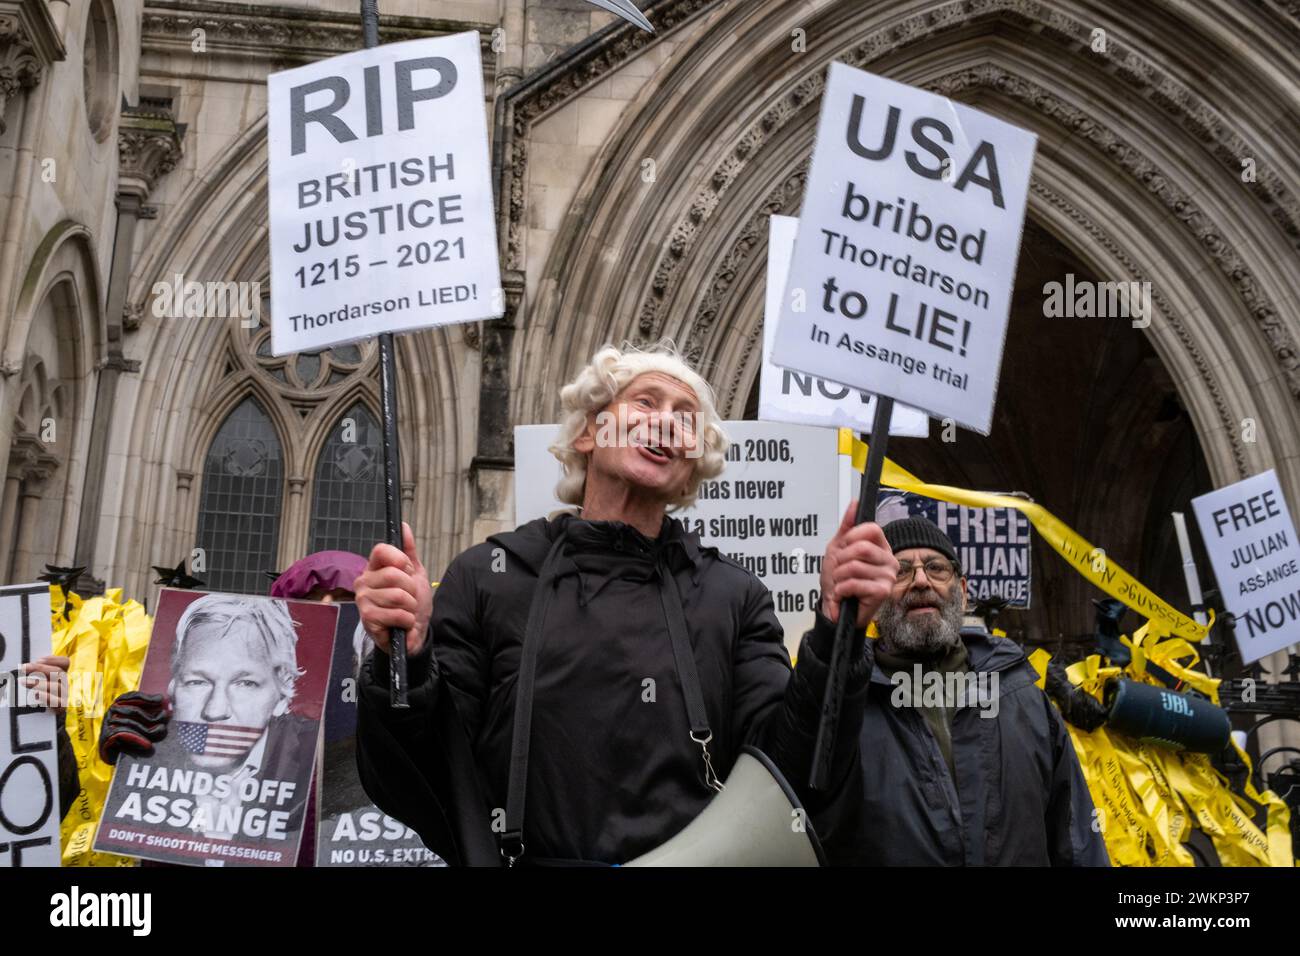 Demonstrators gather outside a London court to show support for imprisoned Wikileaks journalist, Julian Assange as he appeals extradition to the US. Stock Photo